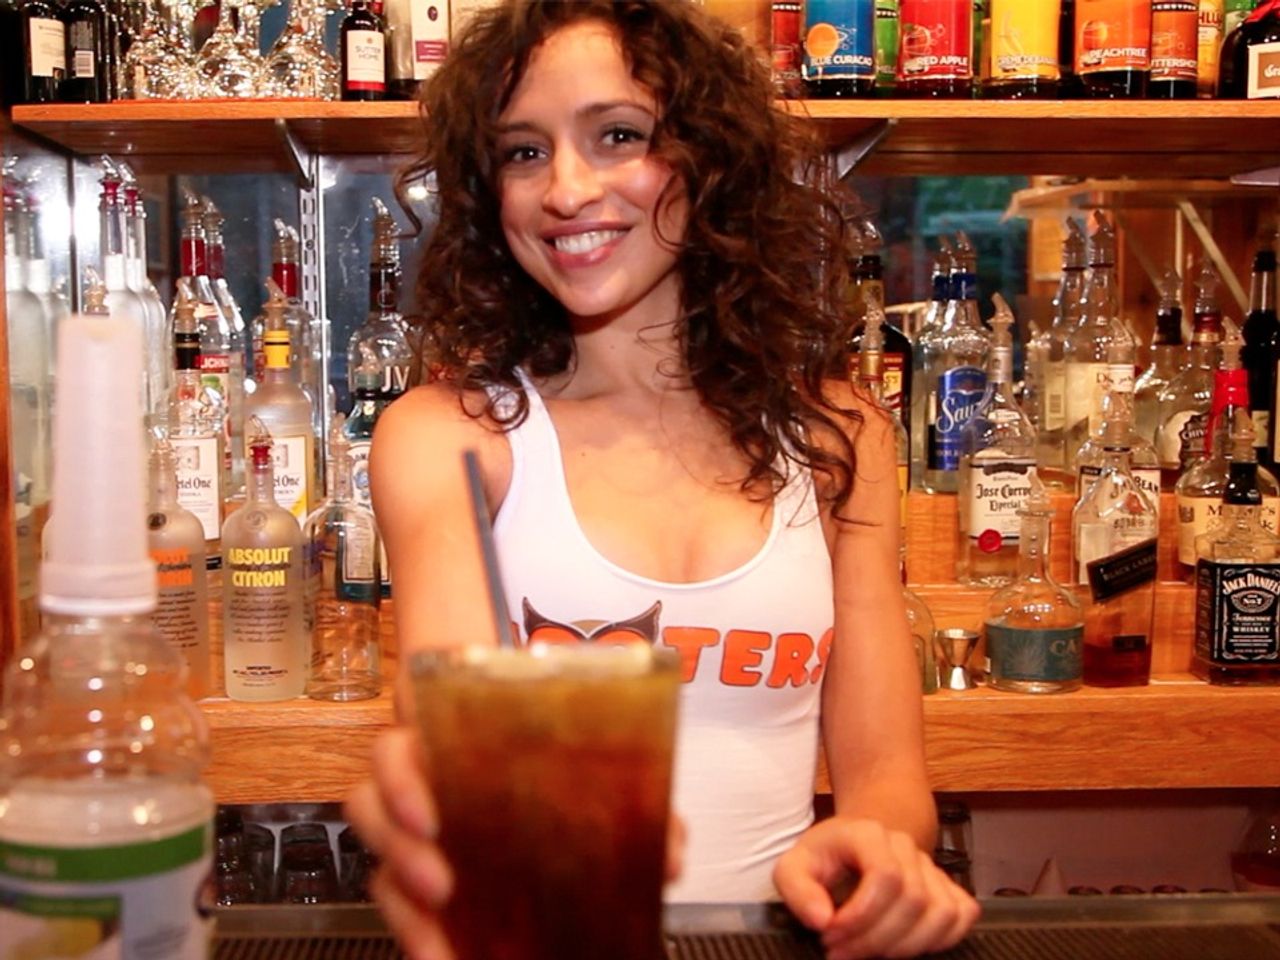 a-hooters-is-serving-angel-shots-to-protect-women-on-bad-tinder-dates